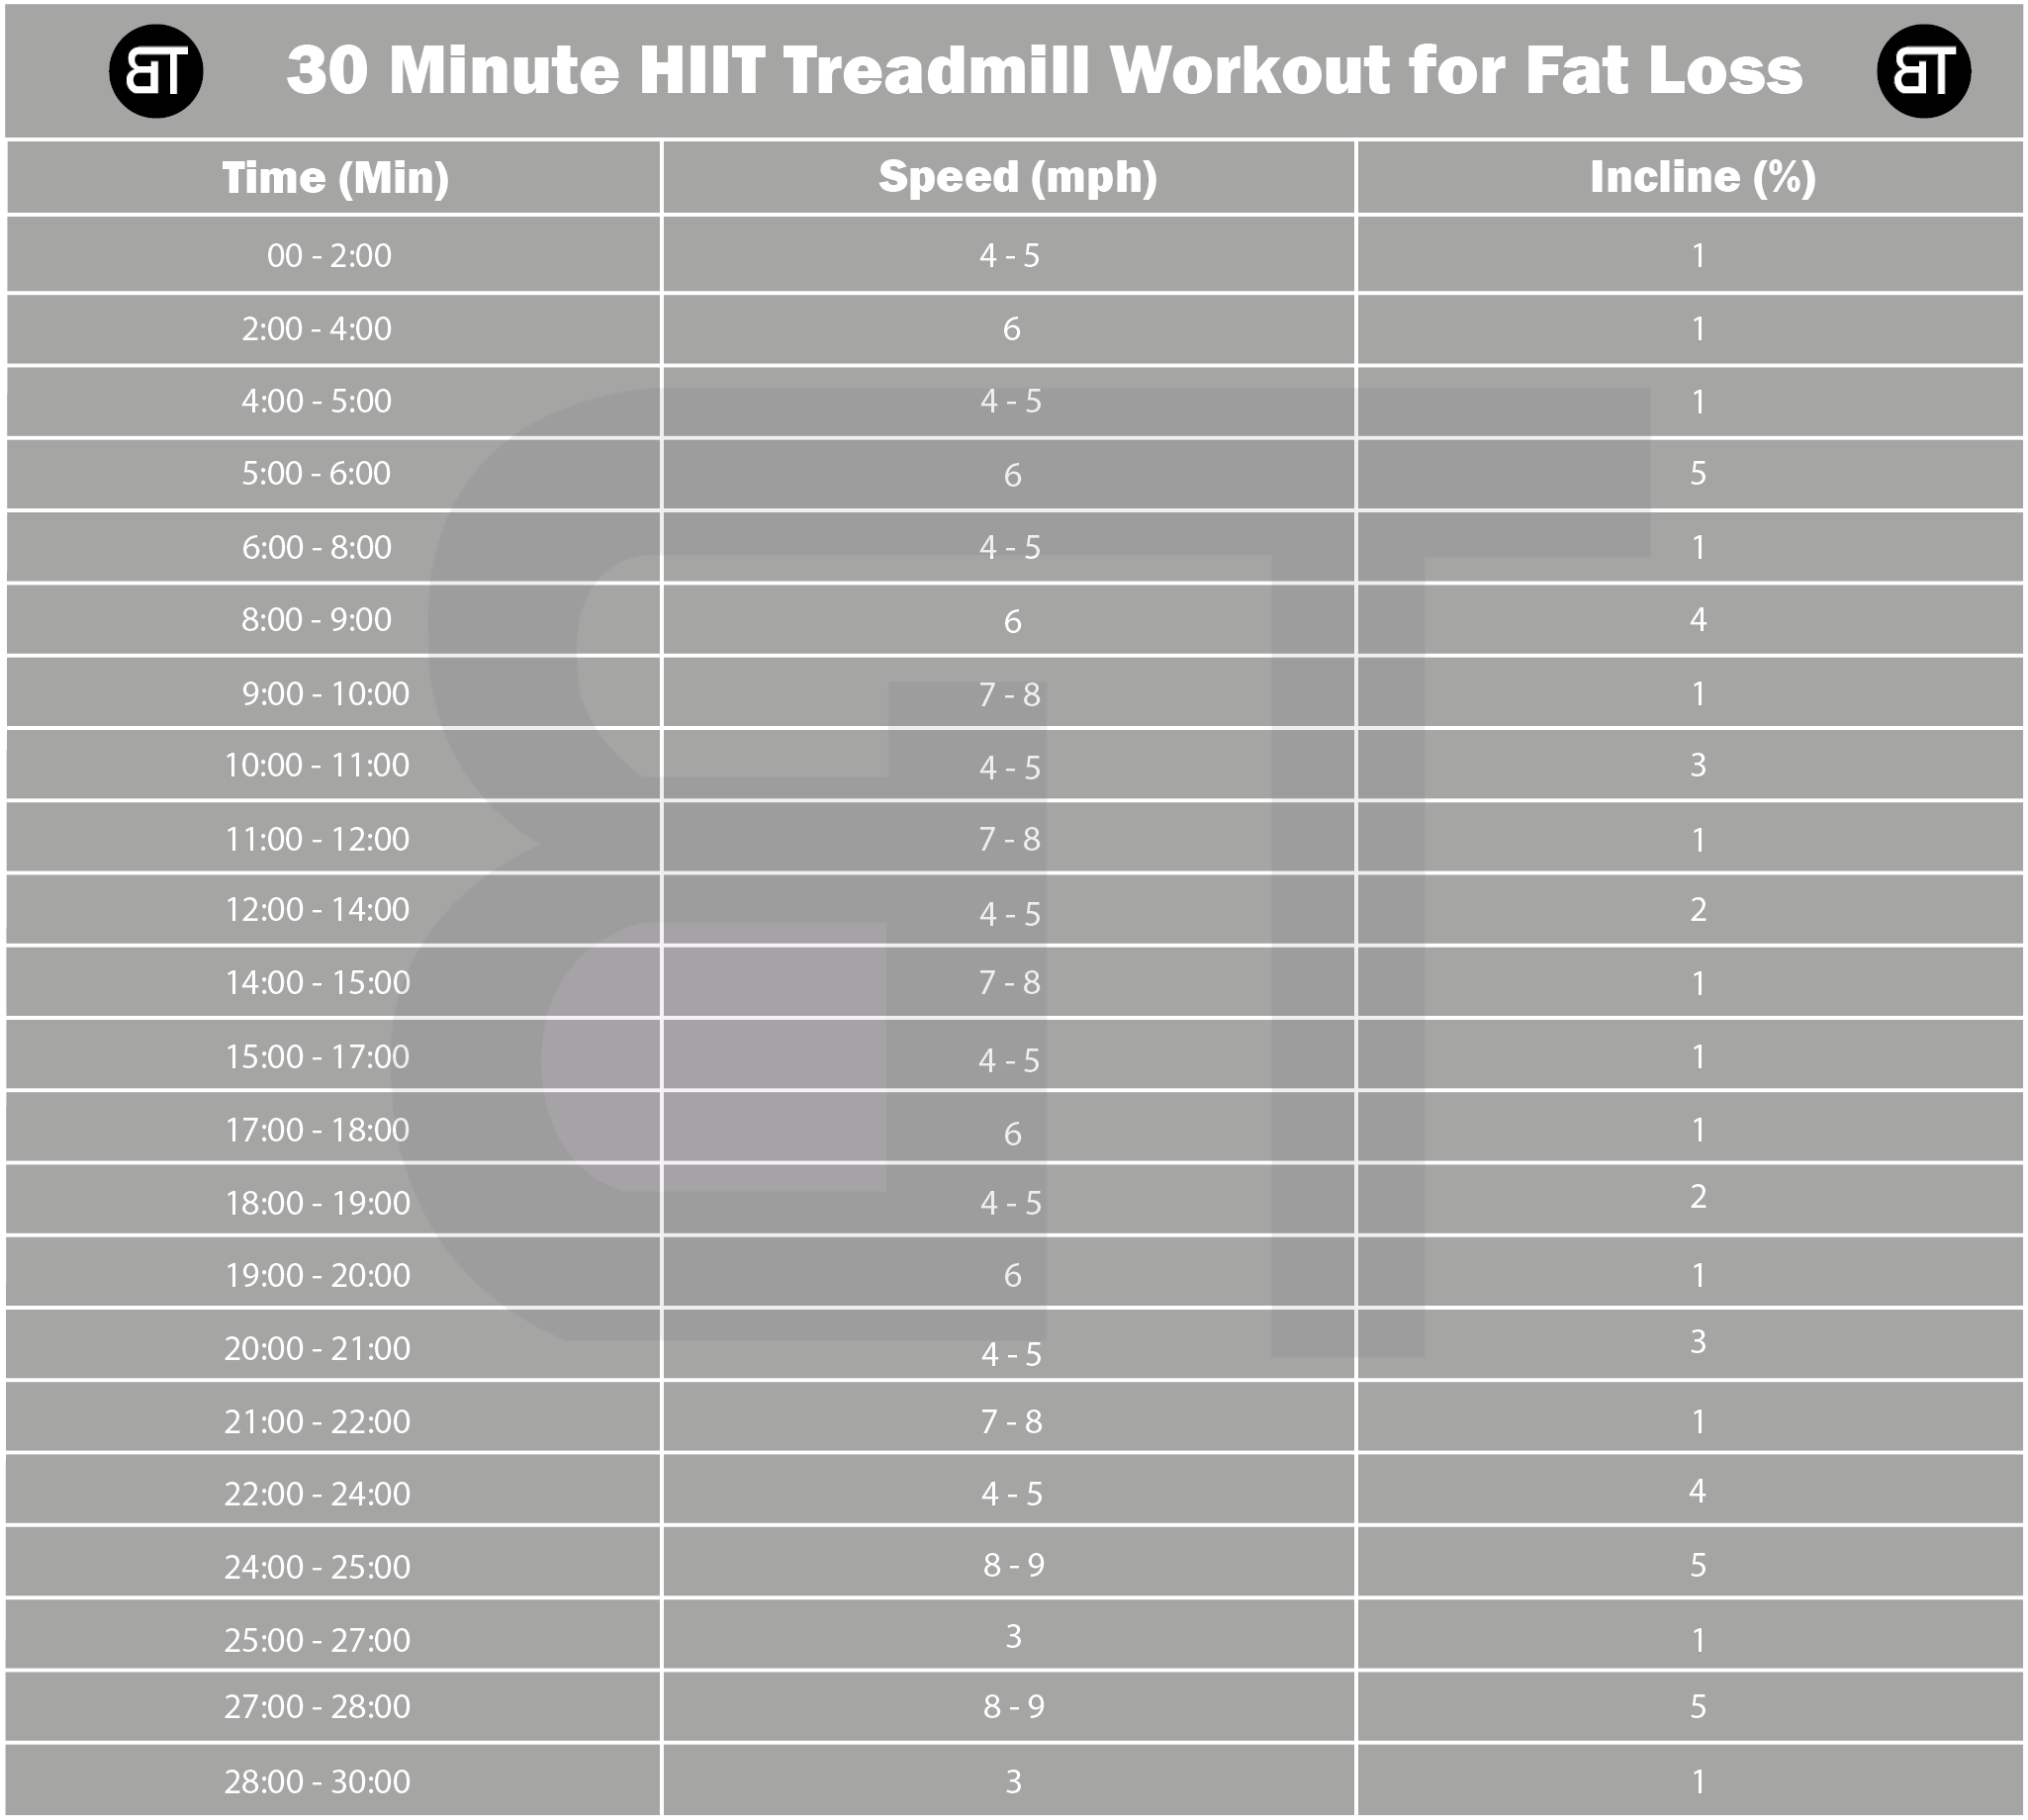 30 Minute HIIT Treadmill Workout for Fat Loss